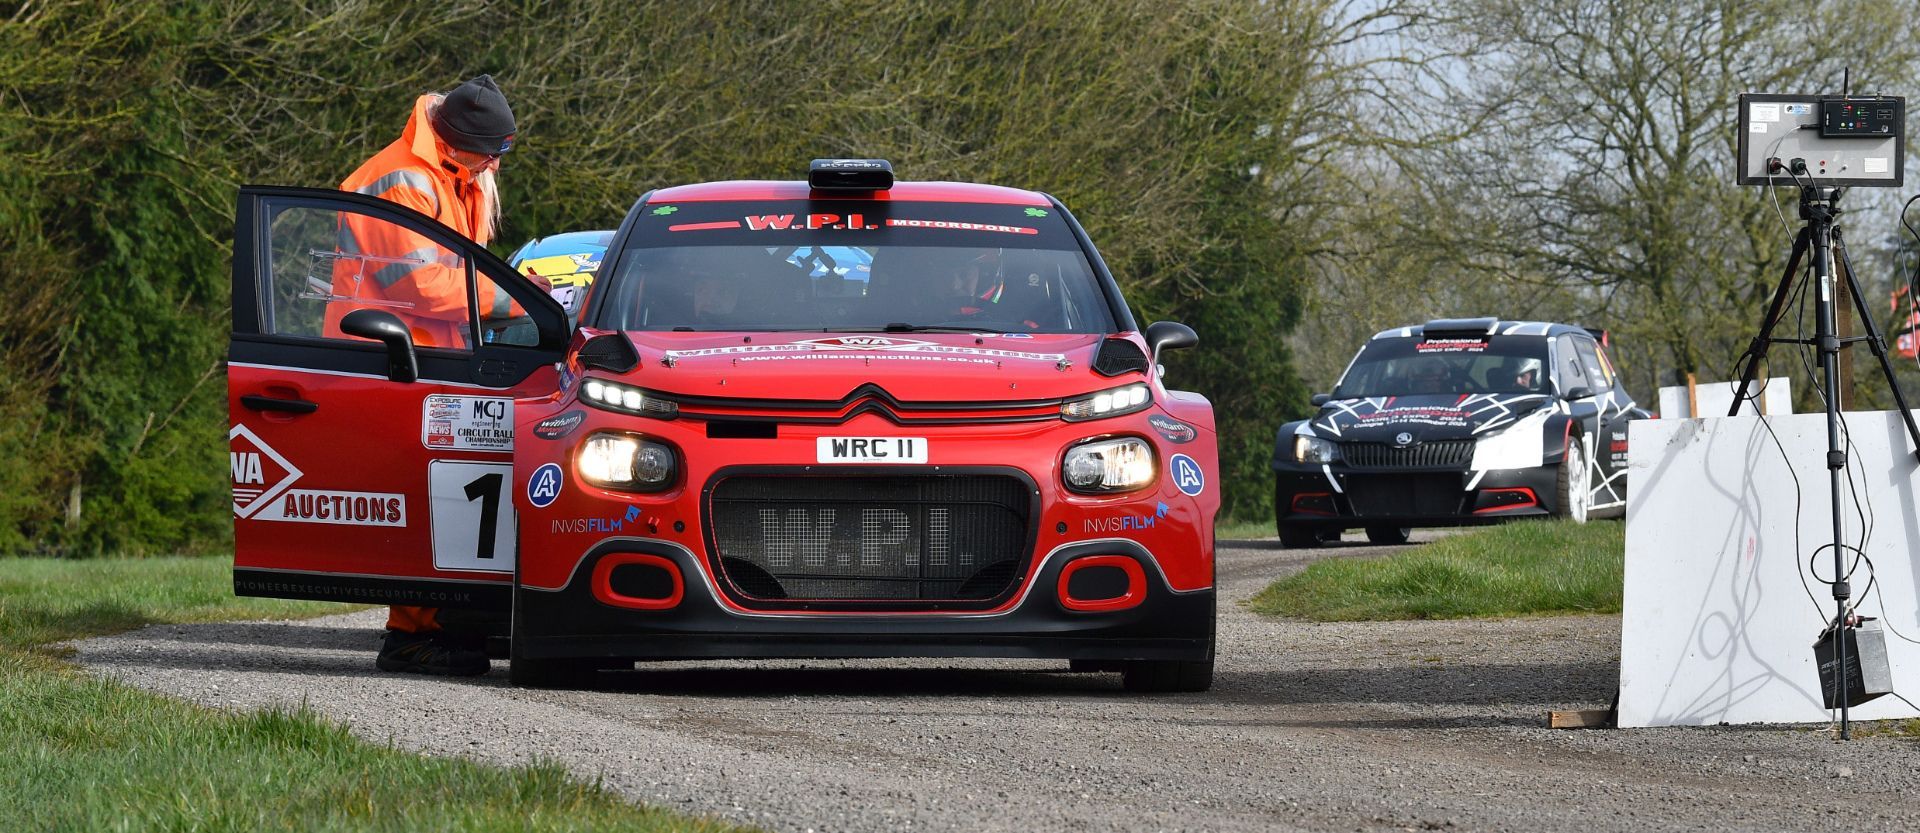 Will Igoe and Will Atkins in the red Citroen C3 Rally 2 at the Alan Healy Memorial Rally Cadwell Park